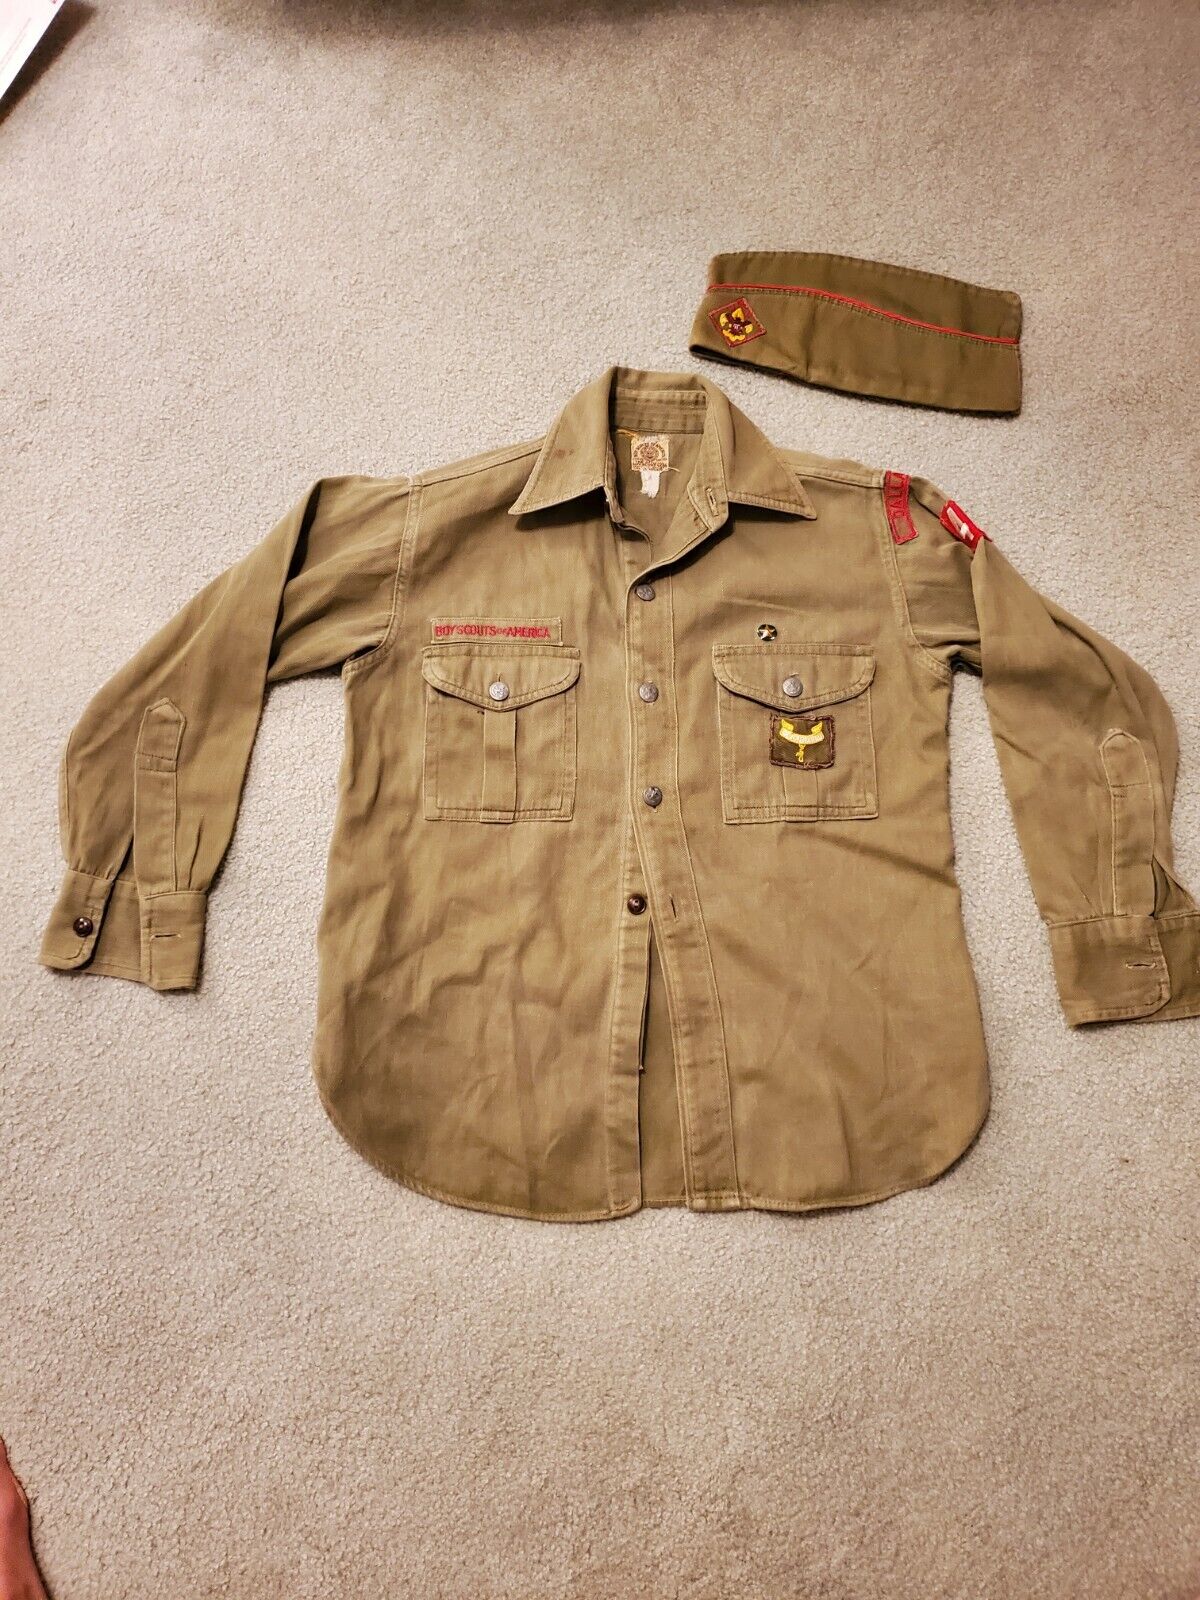 Vintage BOY Scout Shirt and Hat